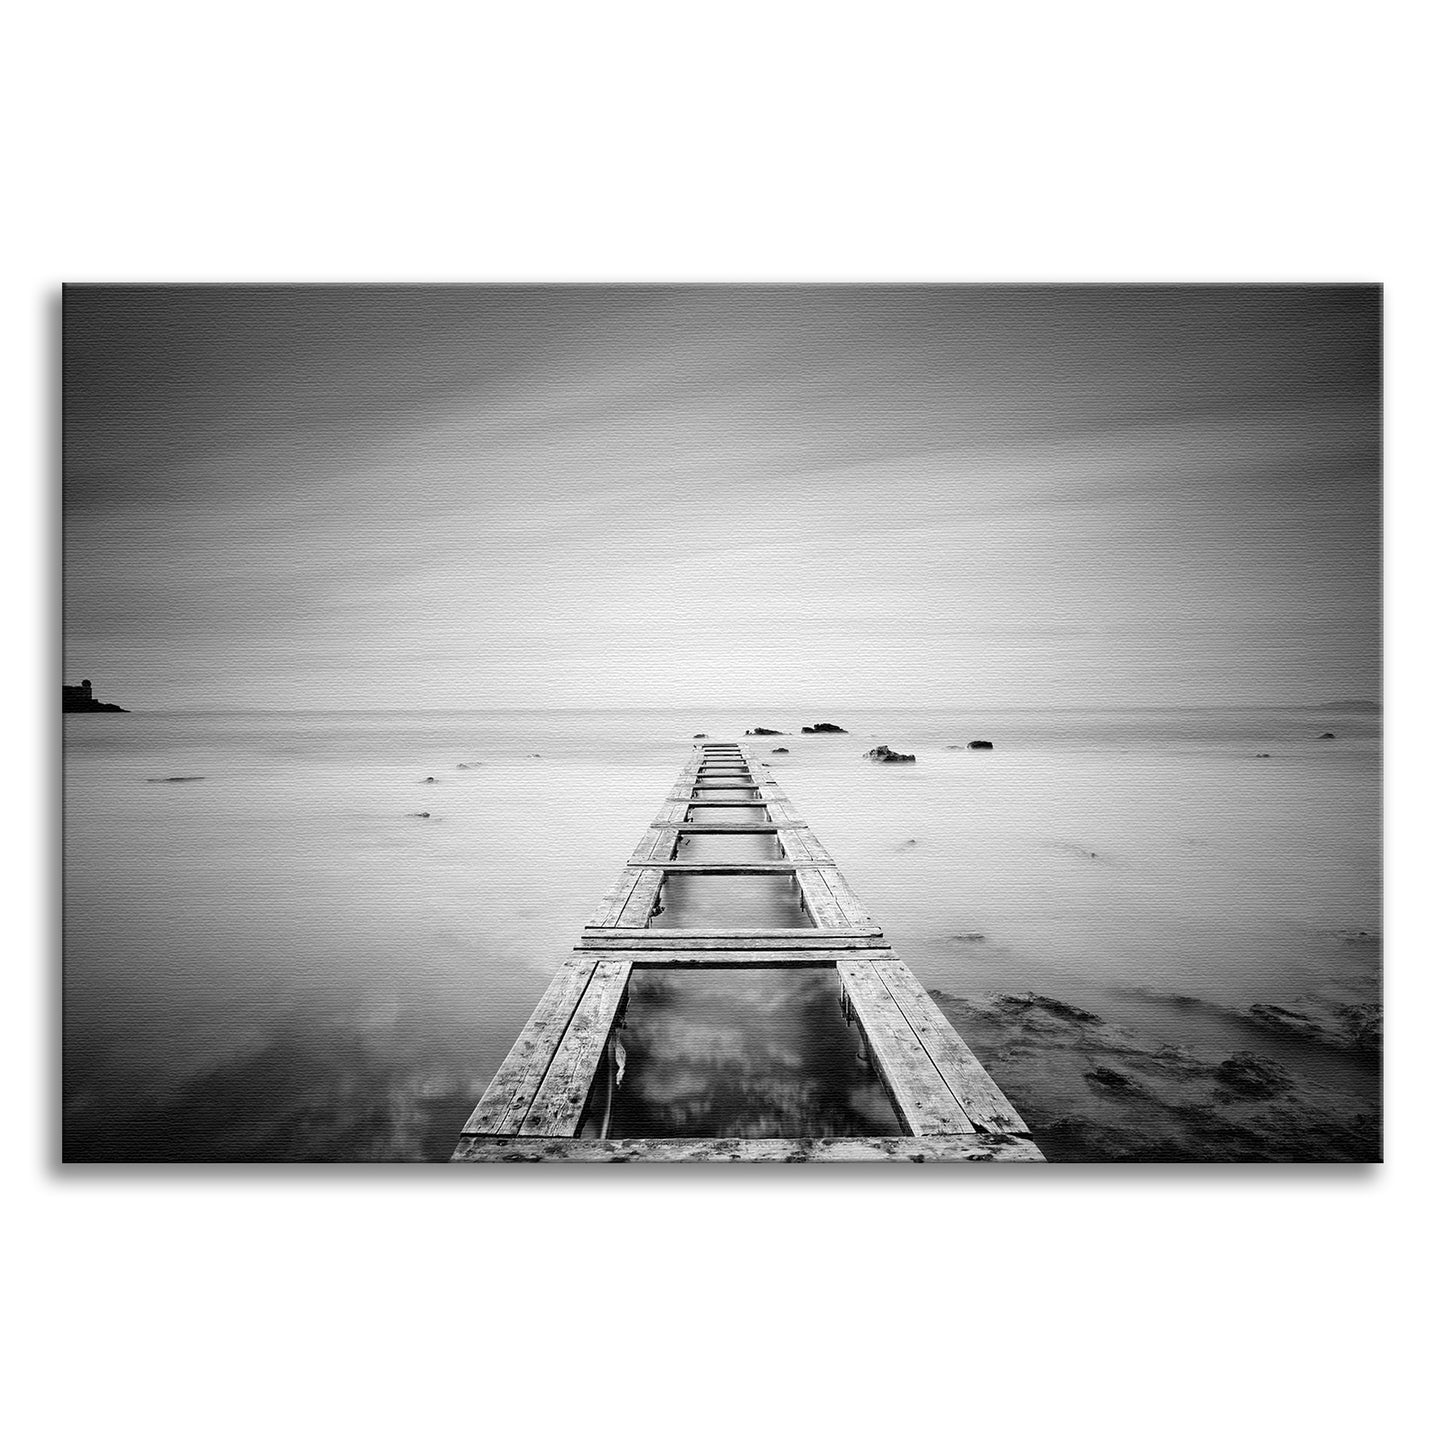 Moody Ocean and Sky Wooden Pier Black and White Landscape Photo Canvas Wall Art Prints